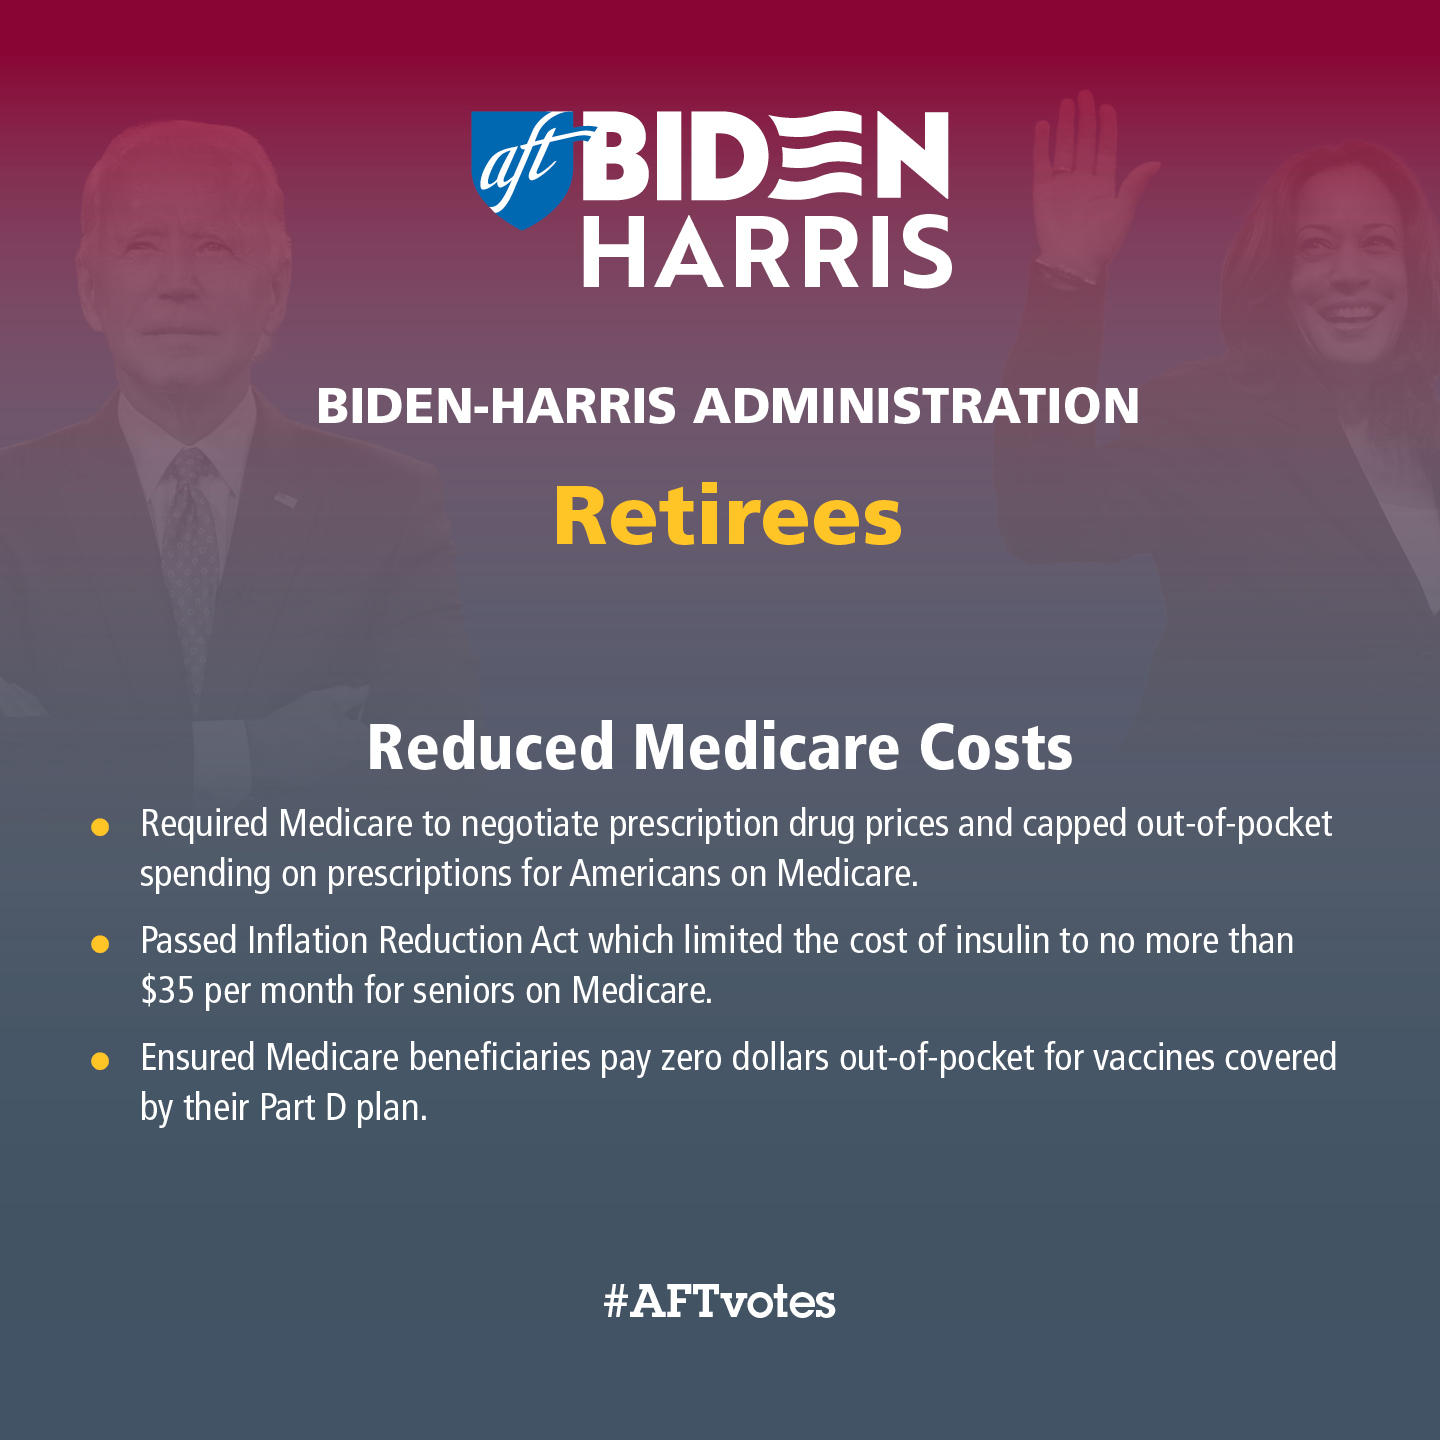 Reduced Medicare Costs